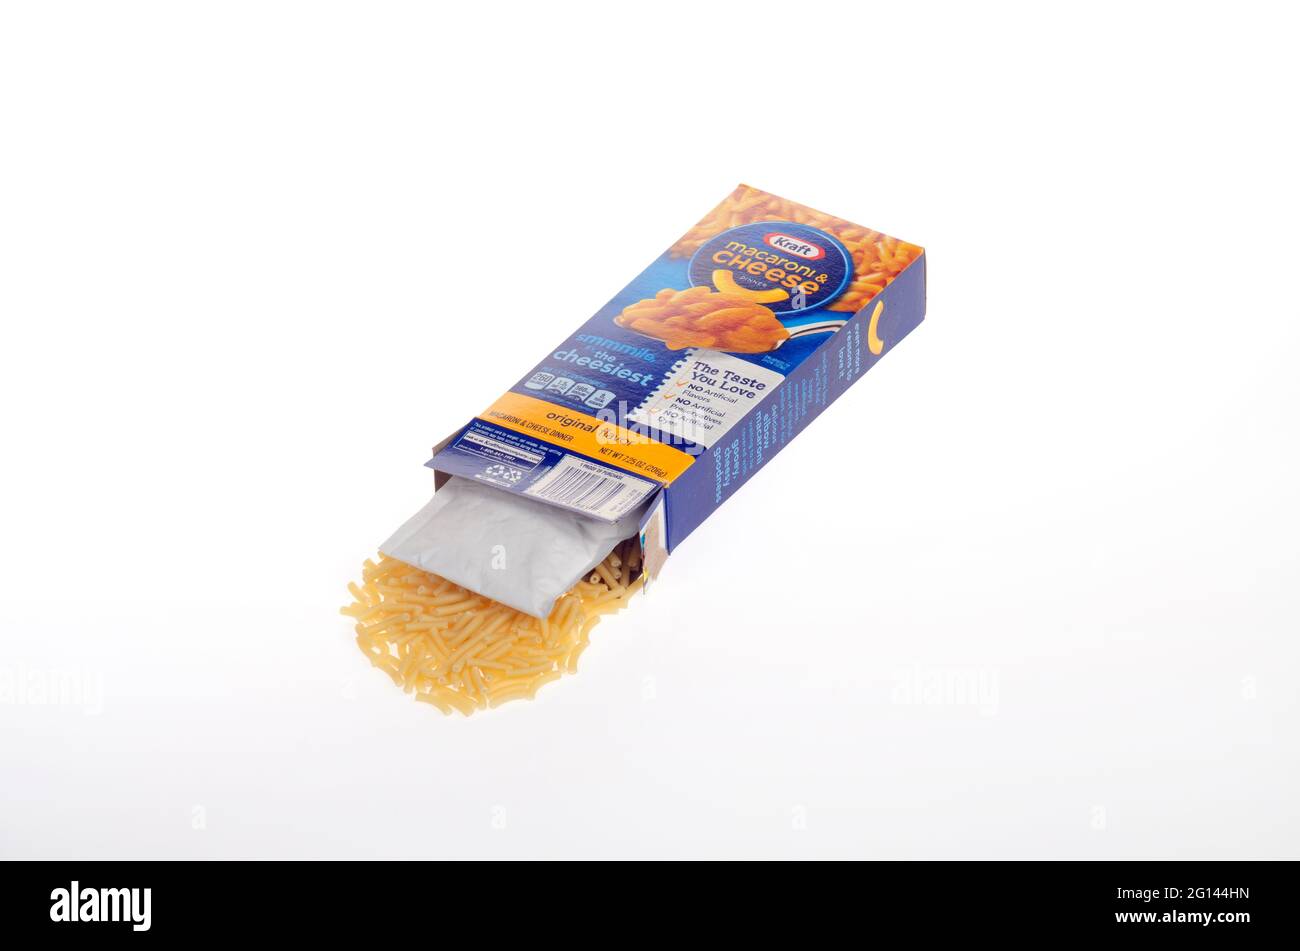 Kraft Macaroni & Cheese open box with pasta elbows and cheese mix packet on white background Stock Photo